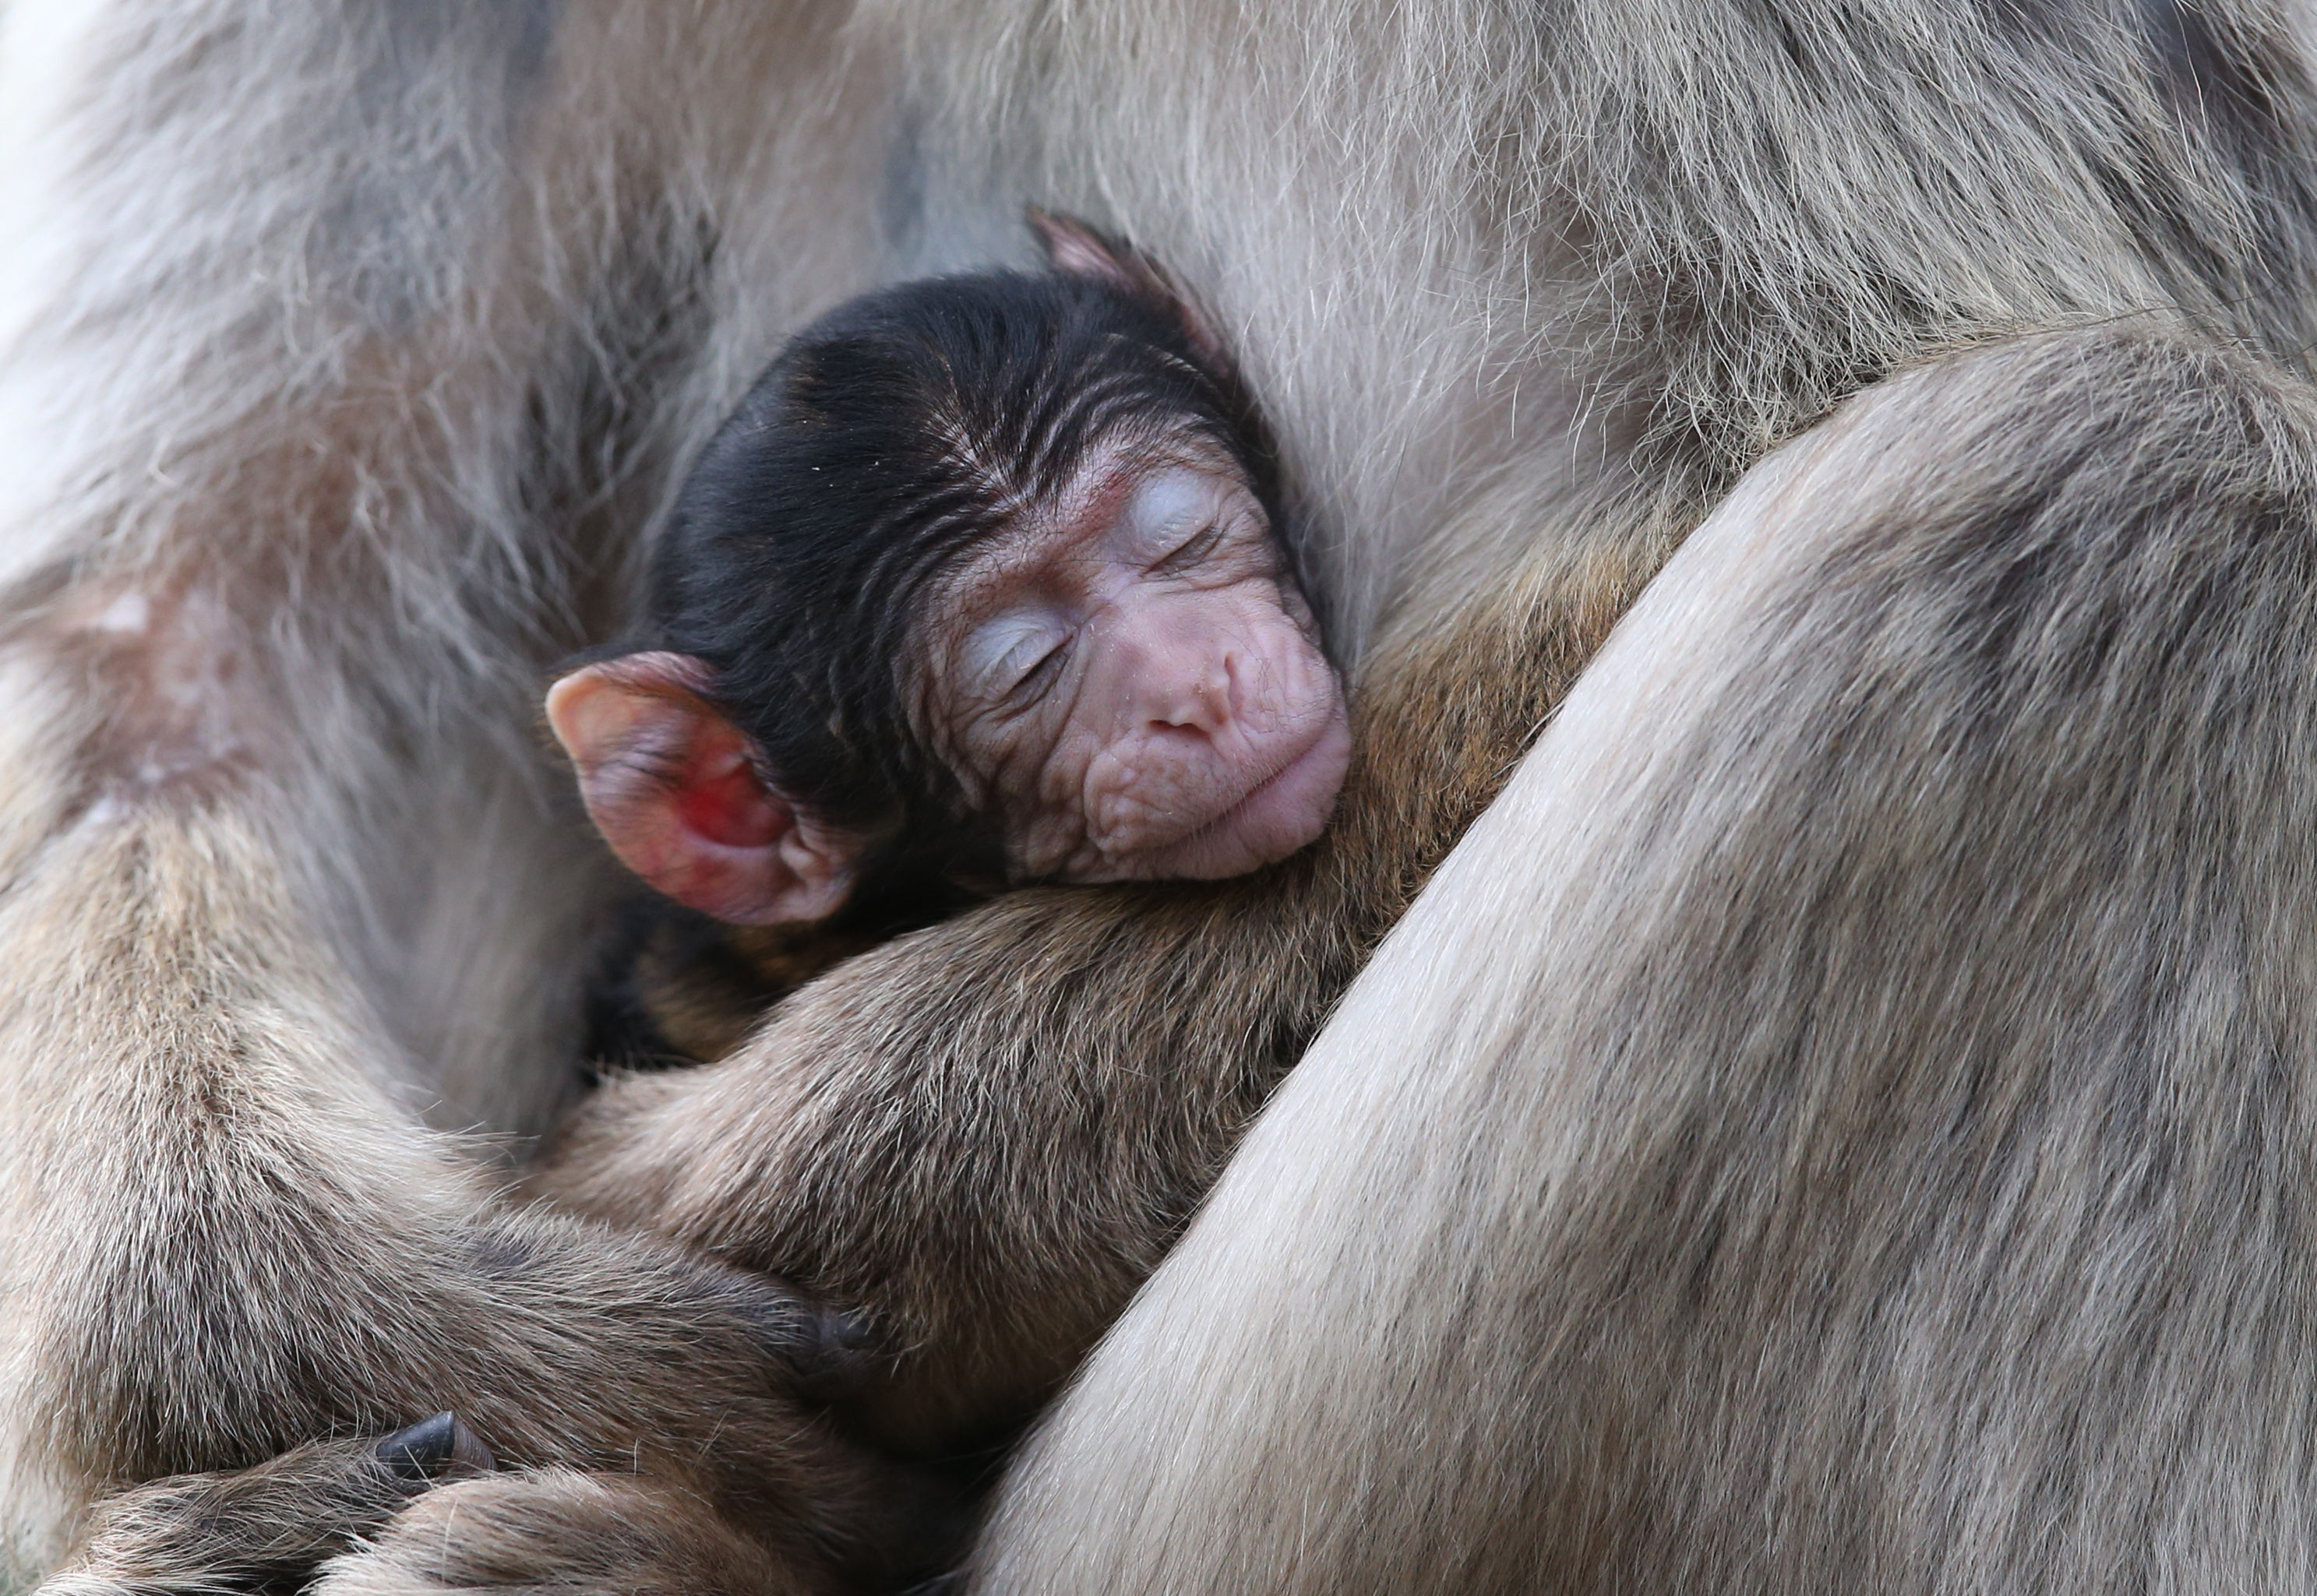 Bute, one of three baby Macaques born recently at Blair Drummond Safari Park near Stirling, with his mother Miss Brodie. (Andrew Milligan/PA Wire)